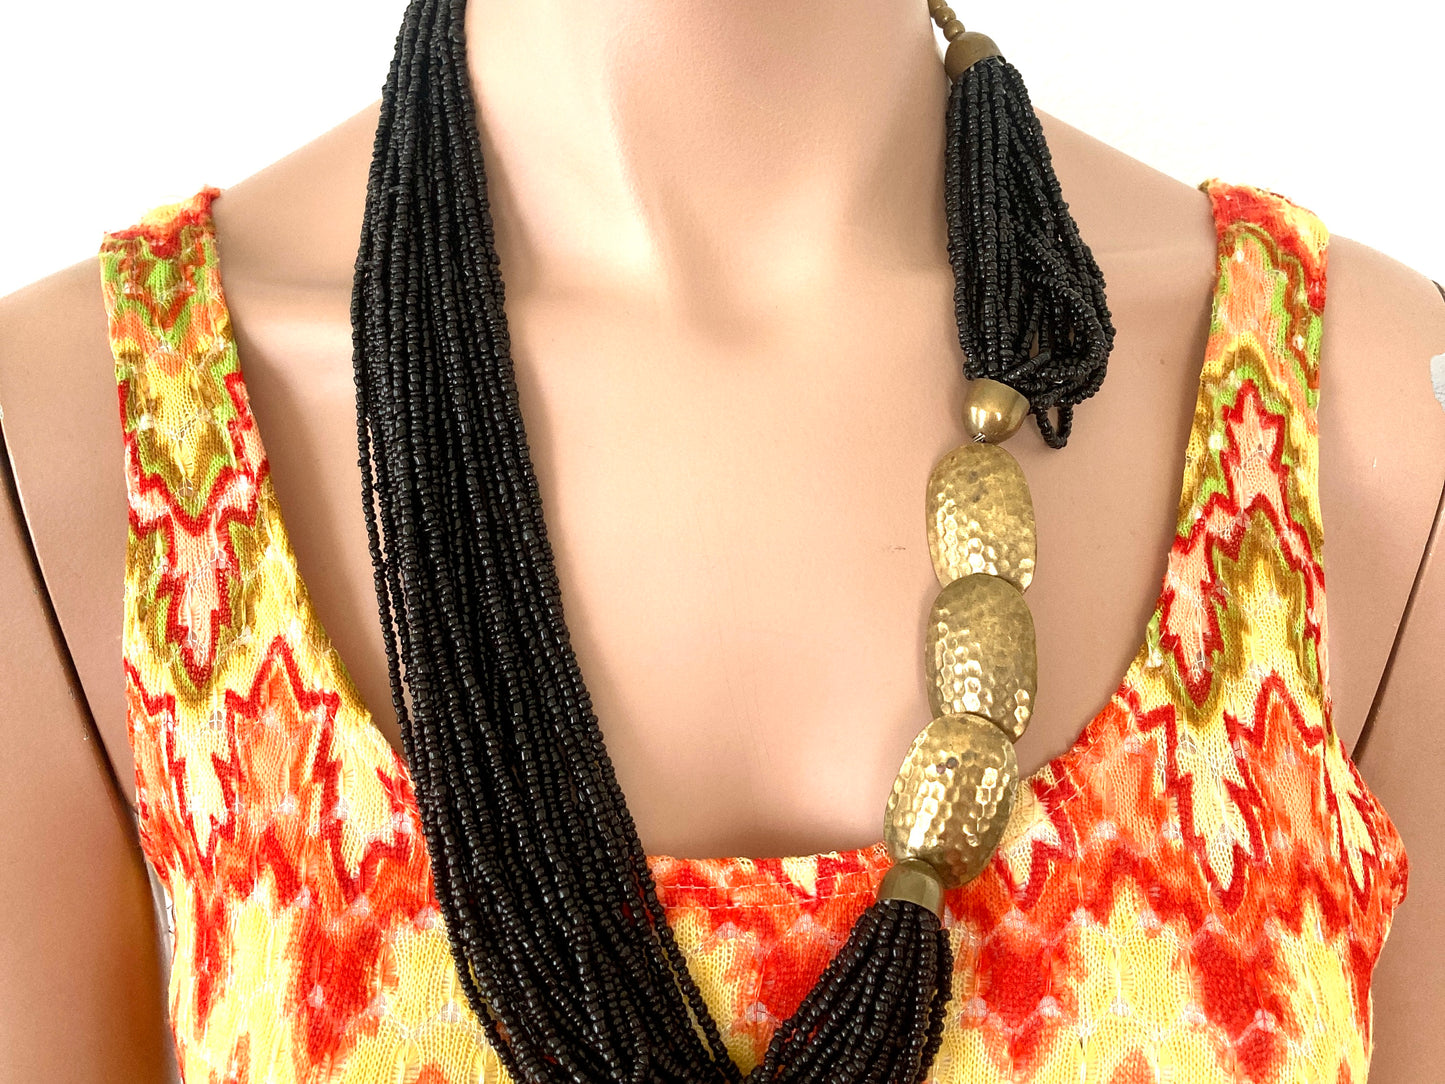 Black Multi-Strand Seed Bead Necklace w/Chunky Brass Accents